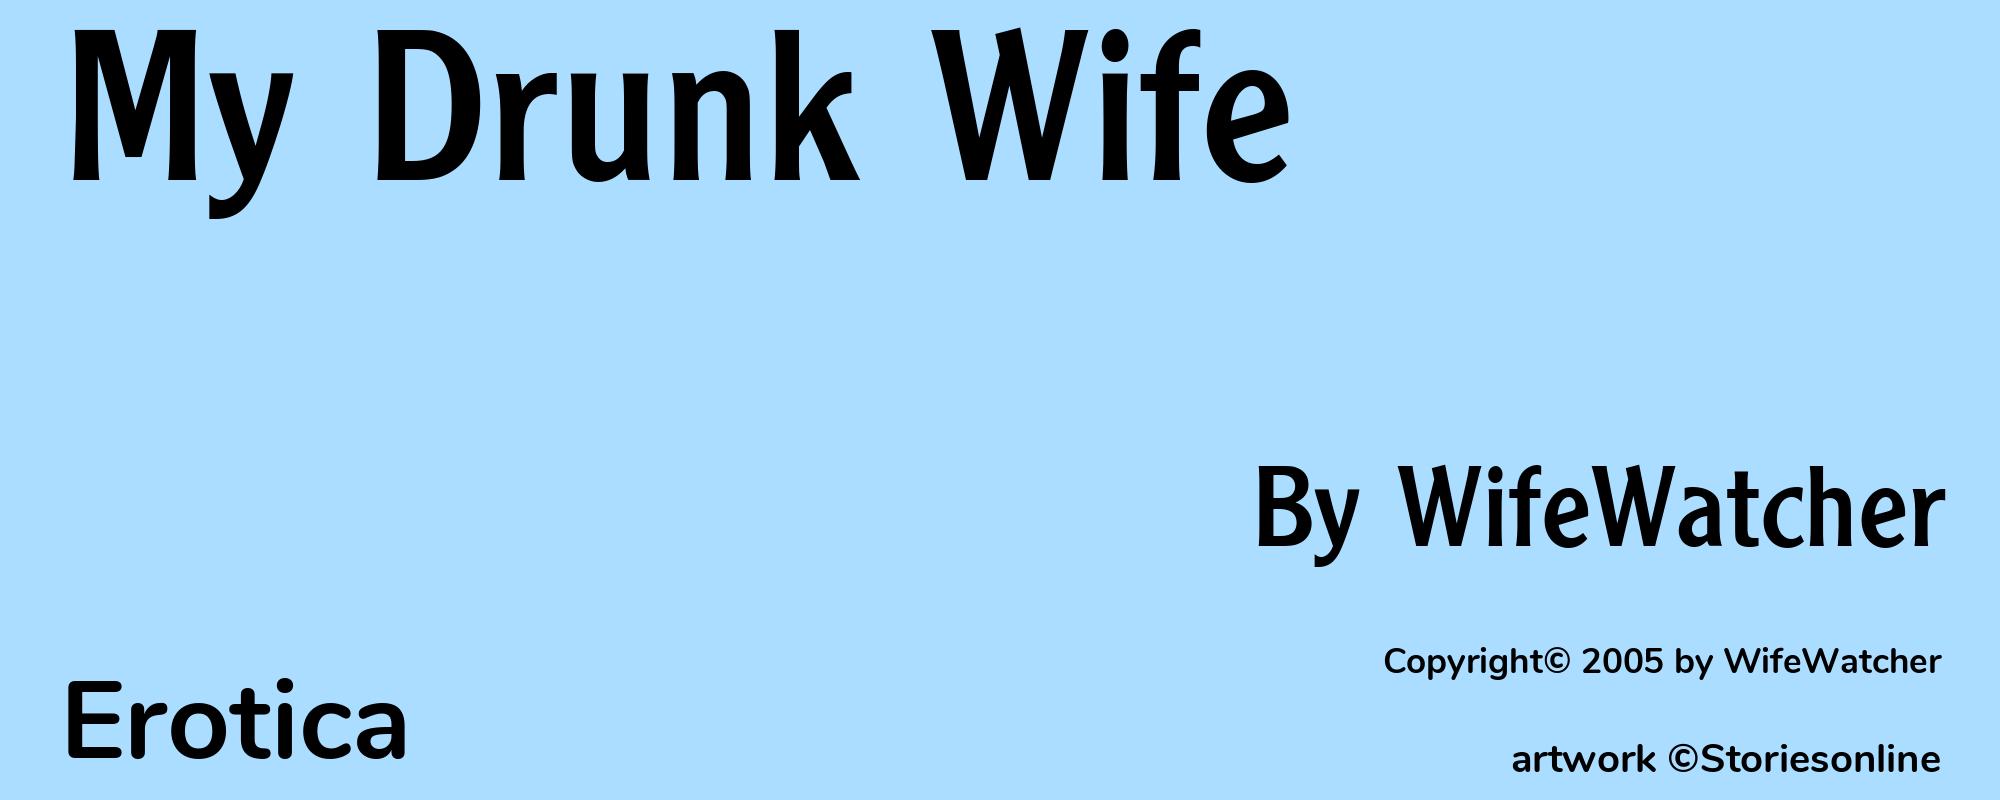 My Drunk Wife - Cover